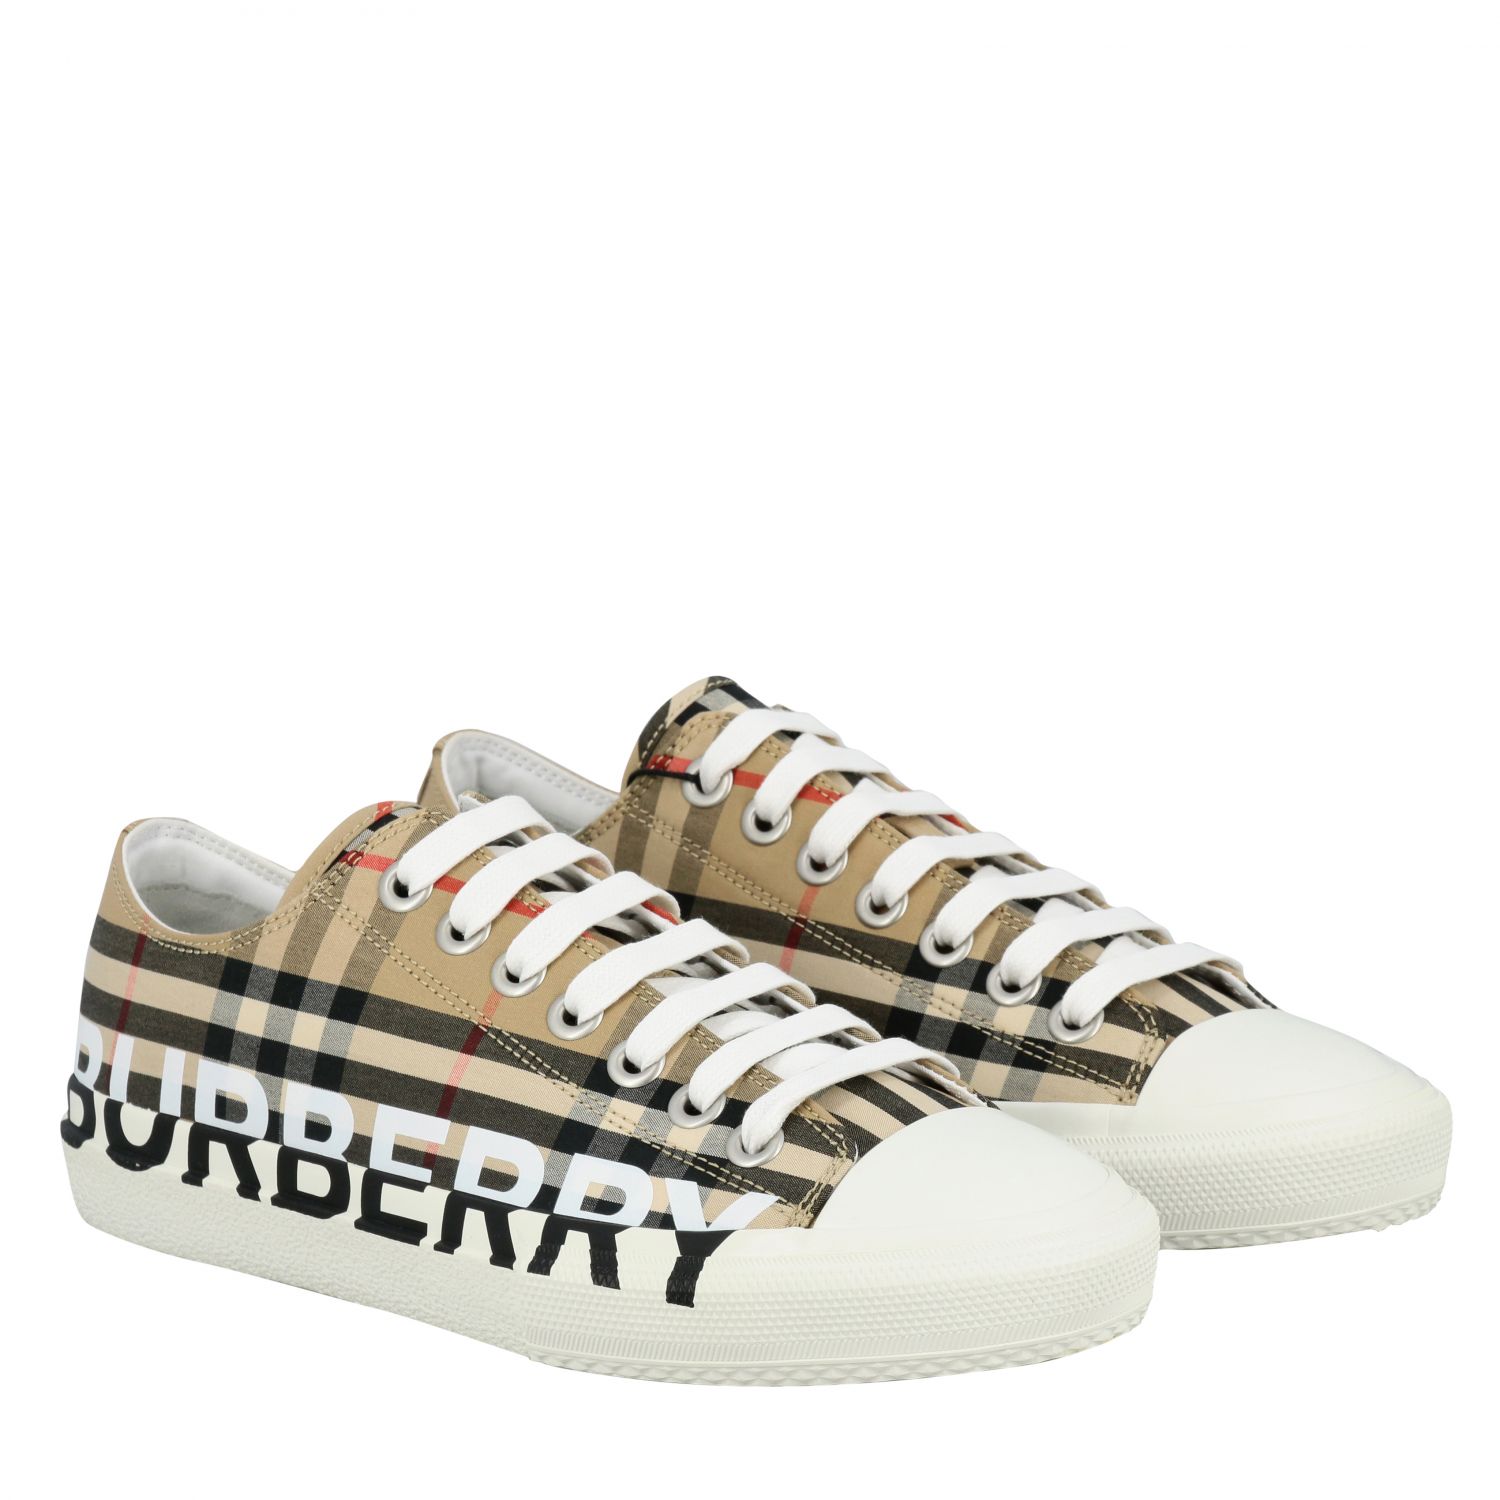 burberry vintage check shoes